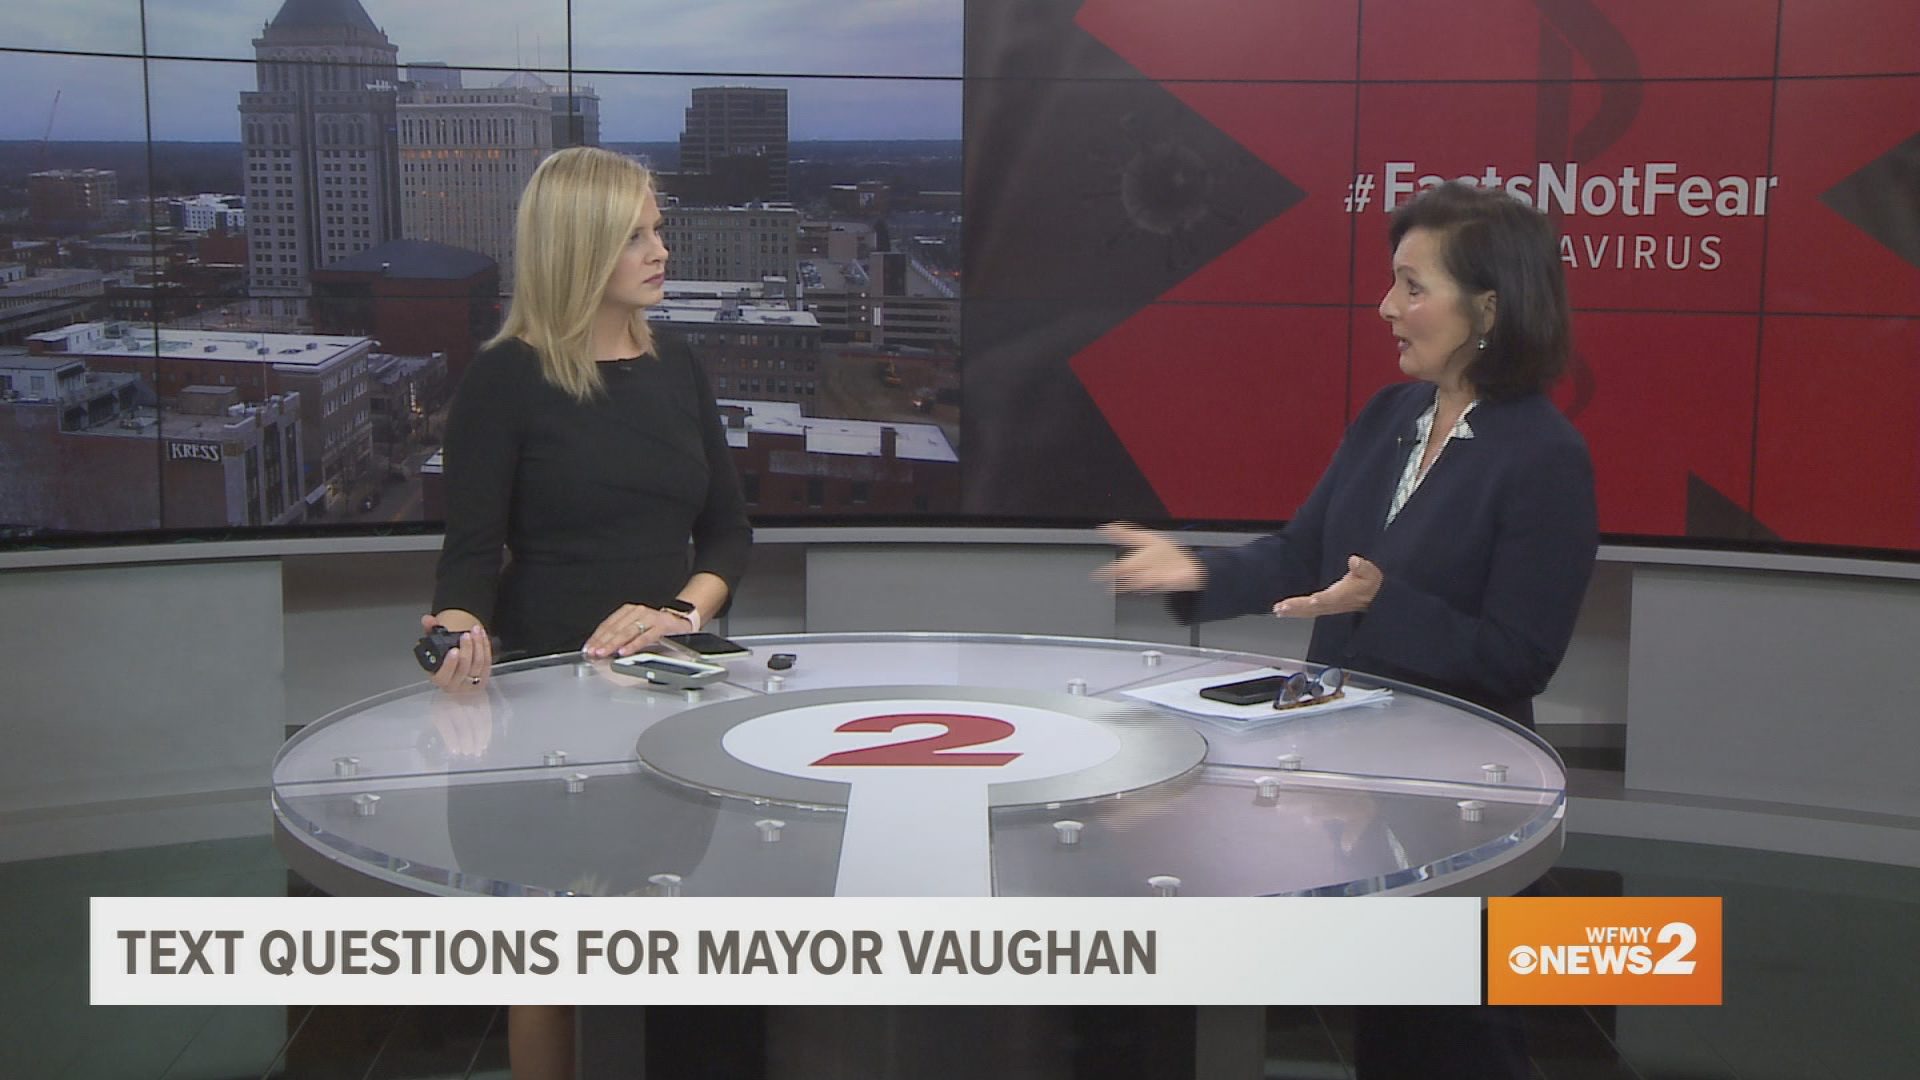 Greensboro Mayor Nancy Vaughan says restaurants and bars haven't closed yet, but whether they do depends on the Governor's next move.